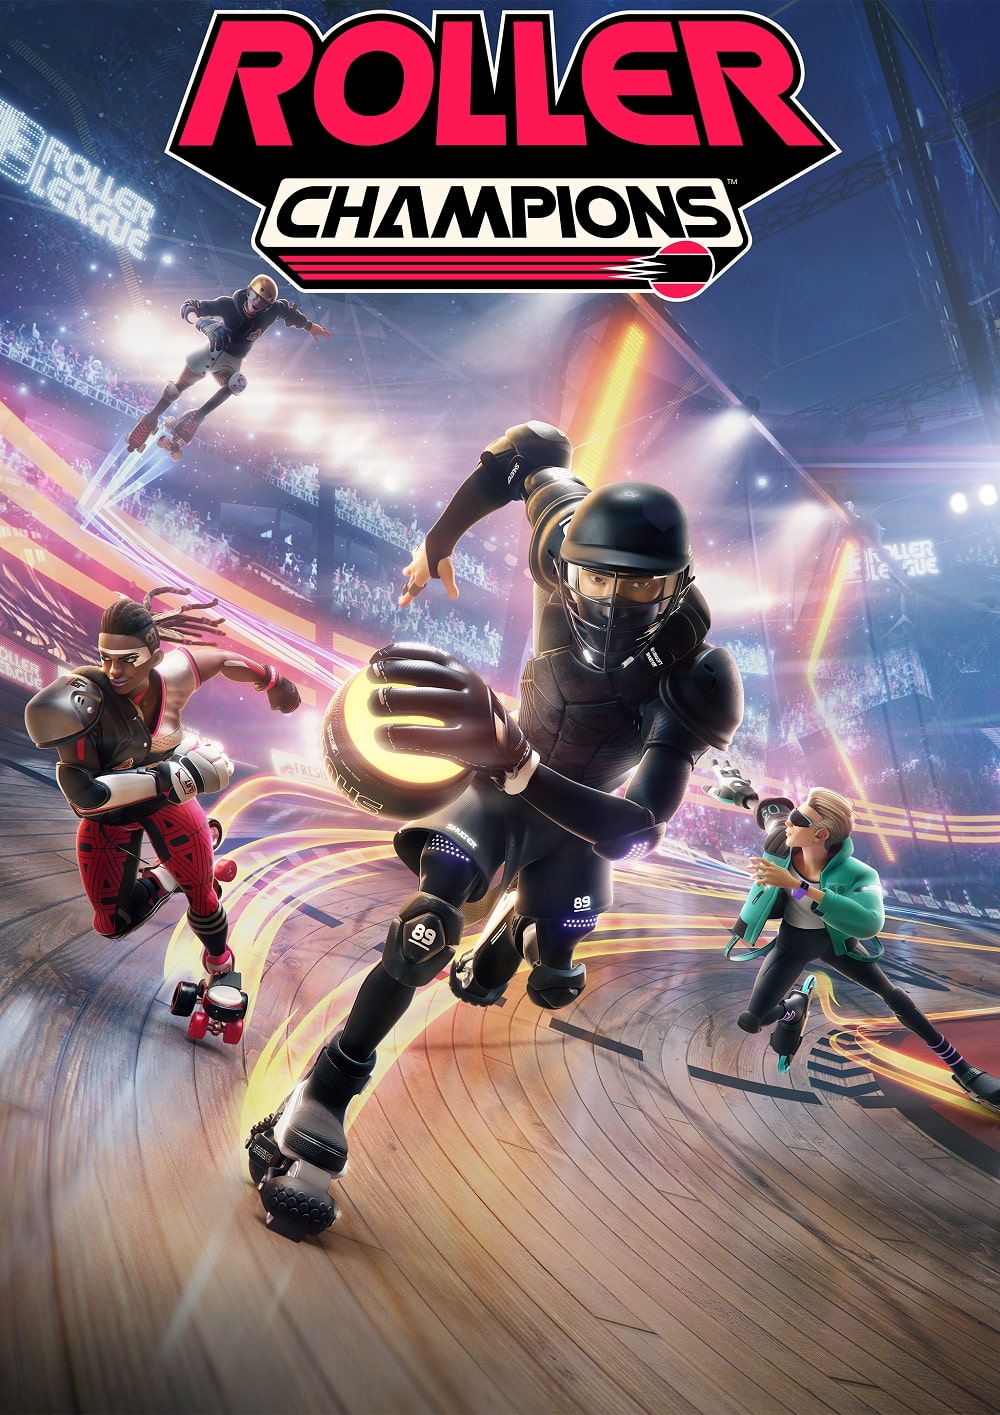 Roller champions affiche 1